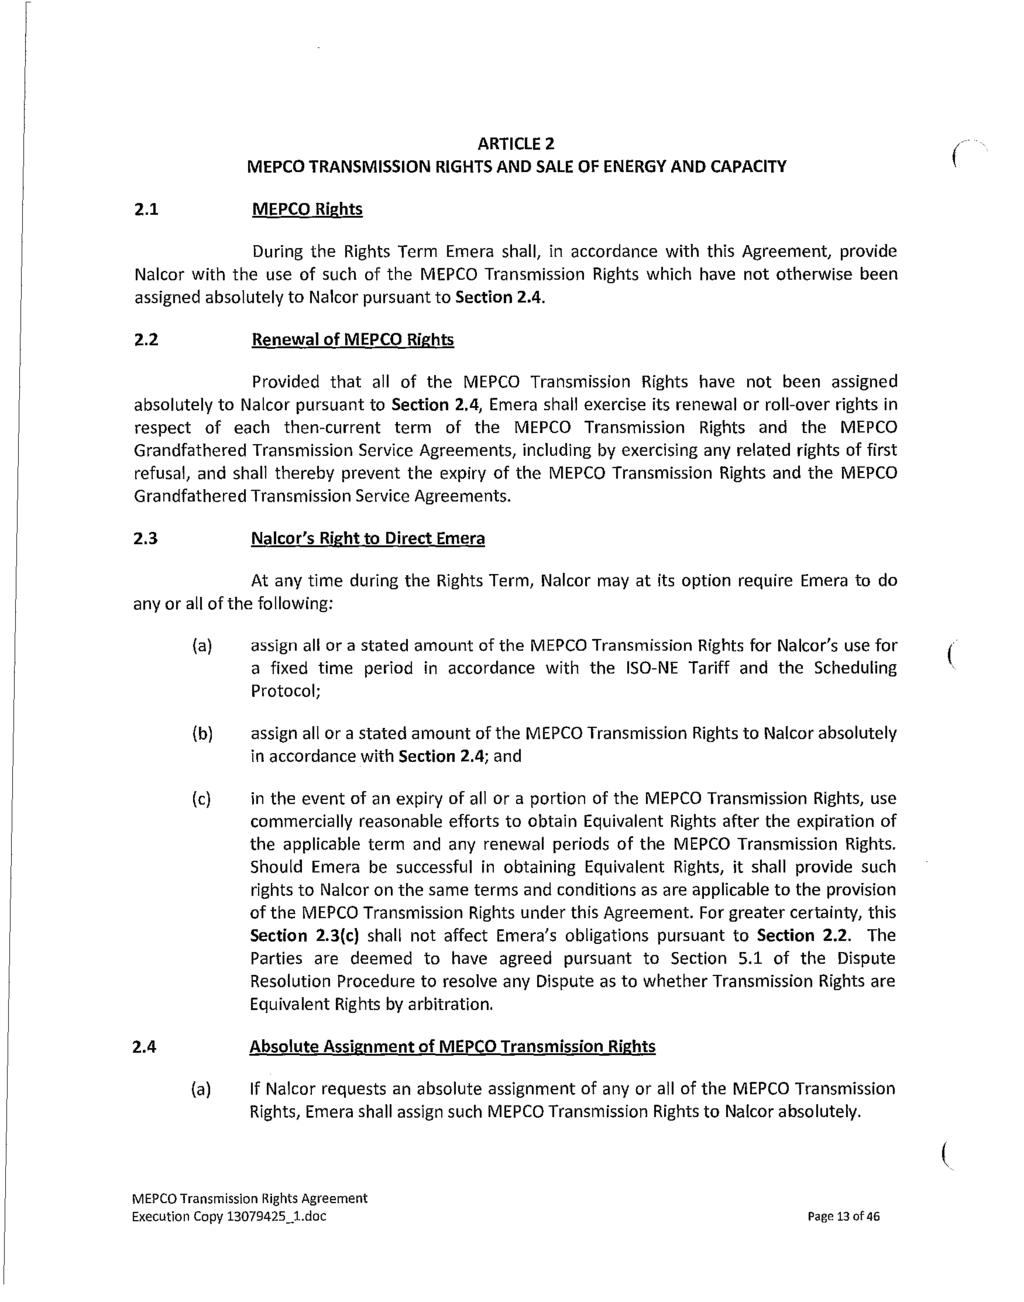 Maritime Link Appendix 2.08 Page 18 of 108 ARTICLE 2 MEPCO TRANSMISSION RIGHTS AND SALE OF ENERGY AND CAPACITY 2.